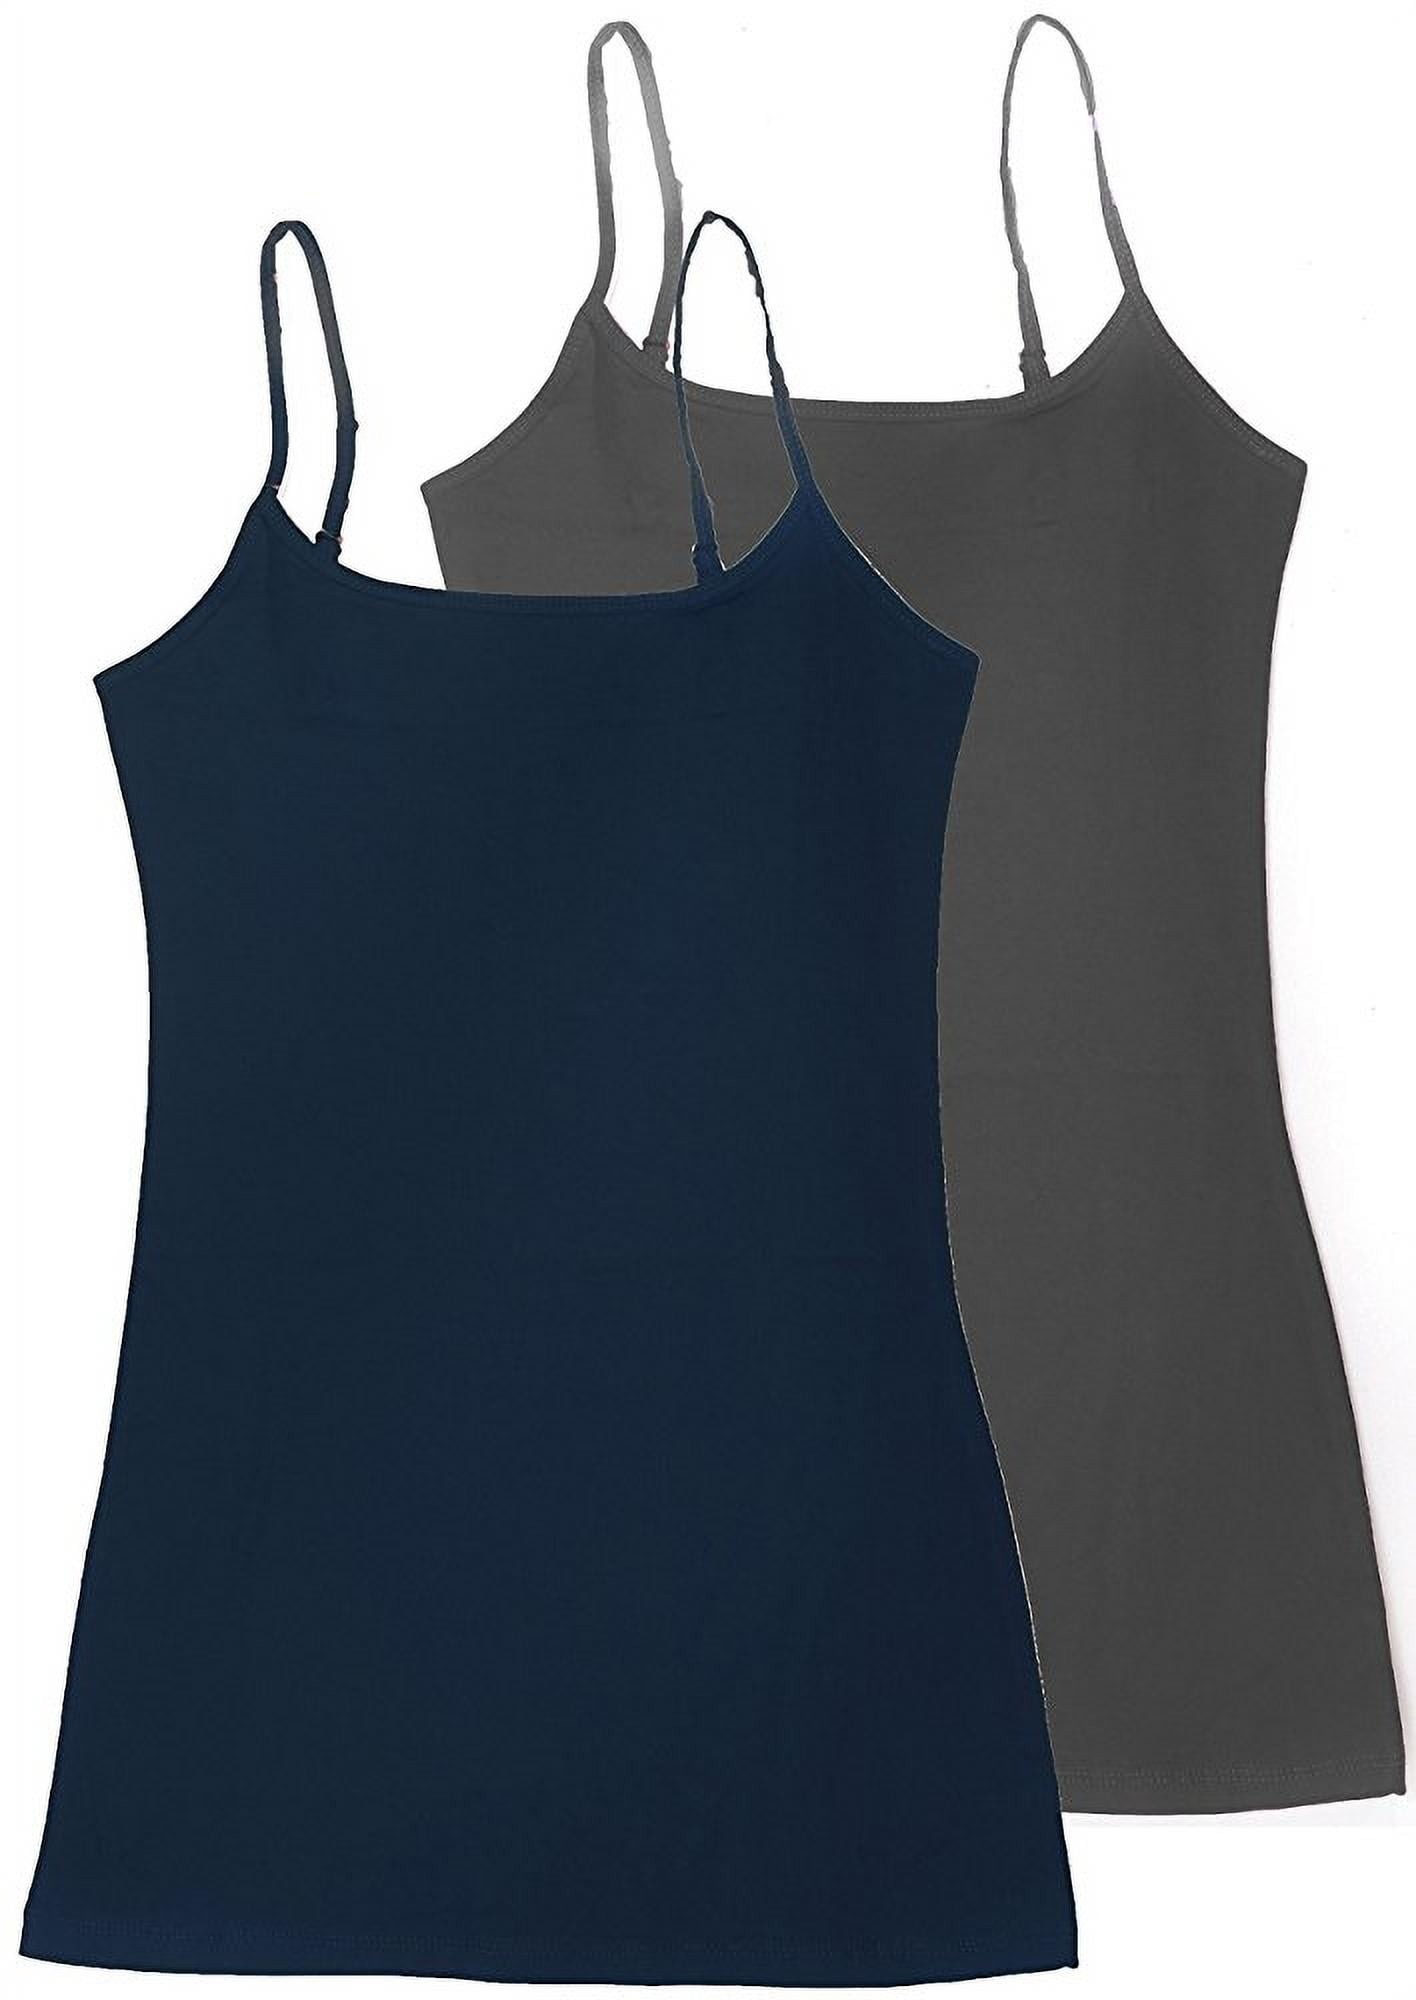 Women's & Juniors Camisole Built in BRA Adjustable Spaghetti Strap Long  Tank Top - 2 Pack 